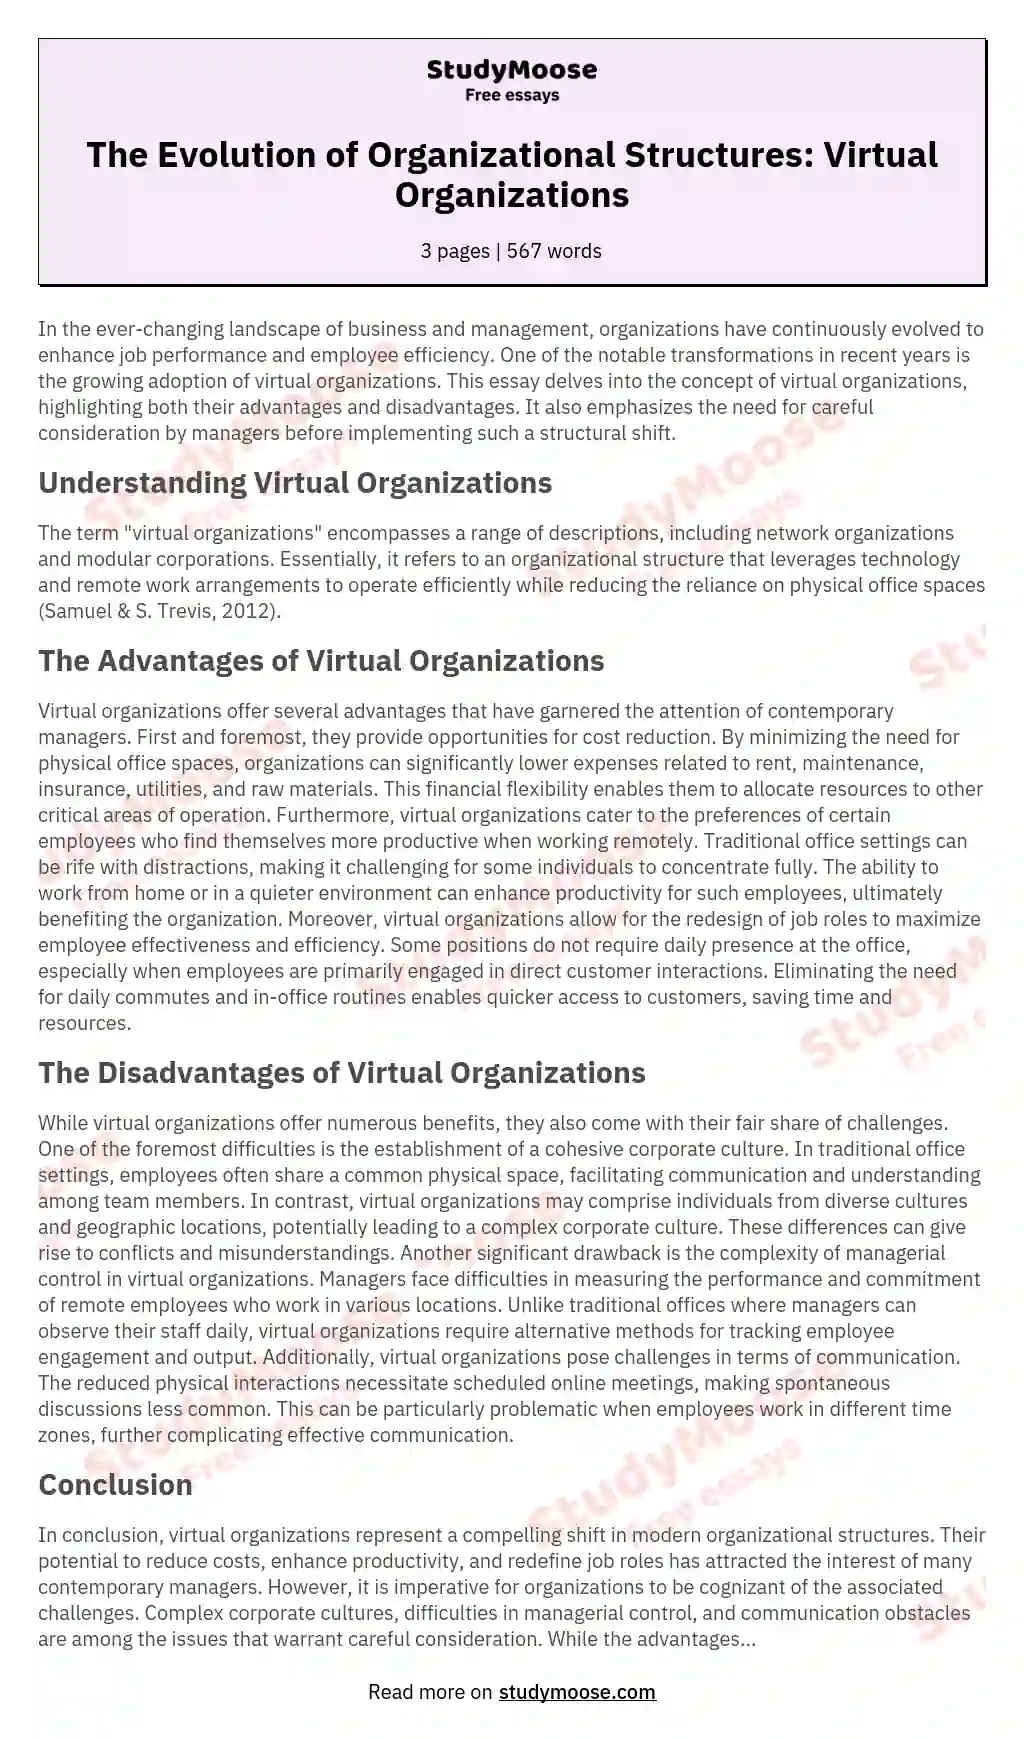 The Evolution of Organizational Structures: Virtual Organizations essay